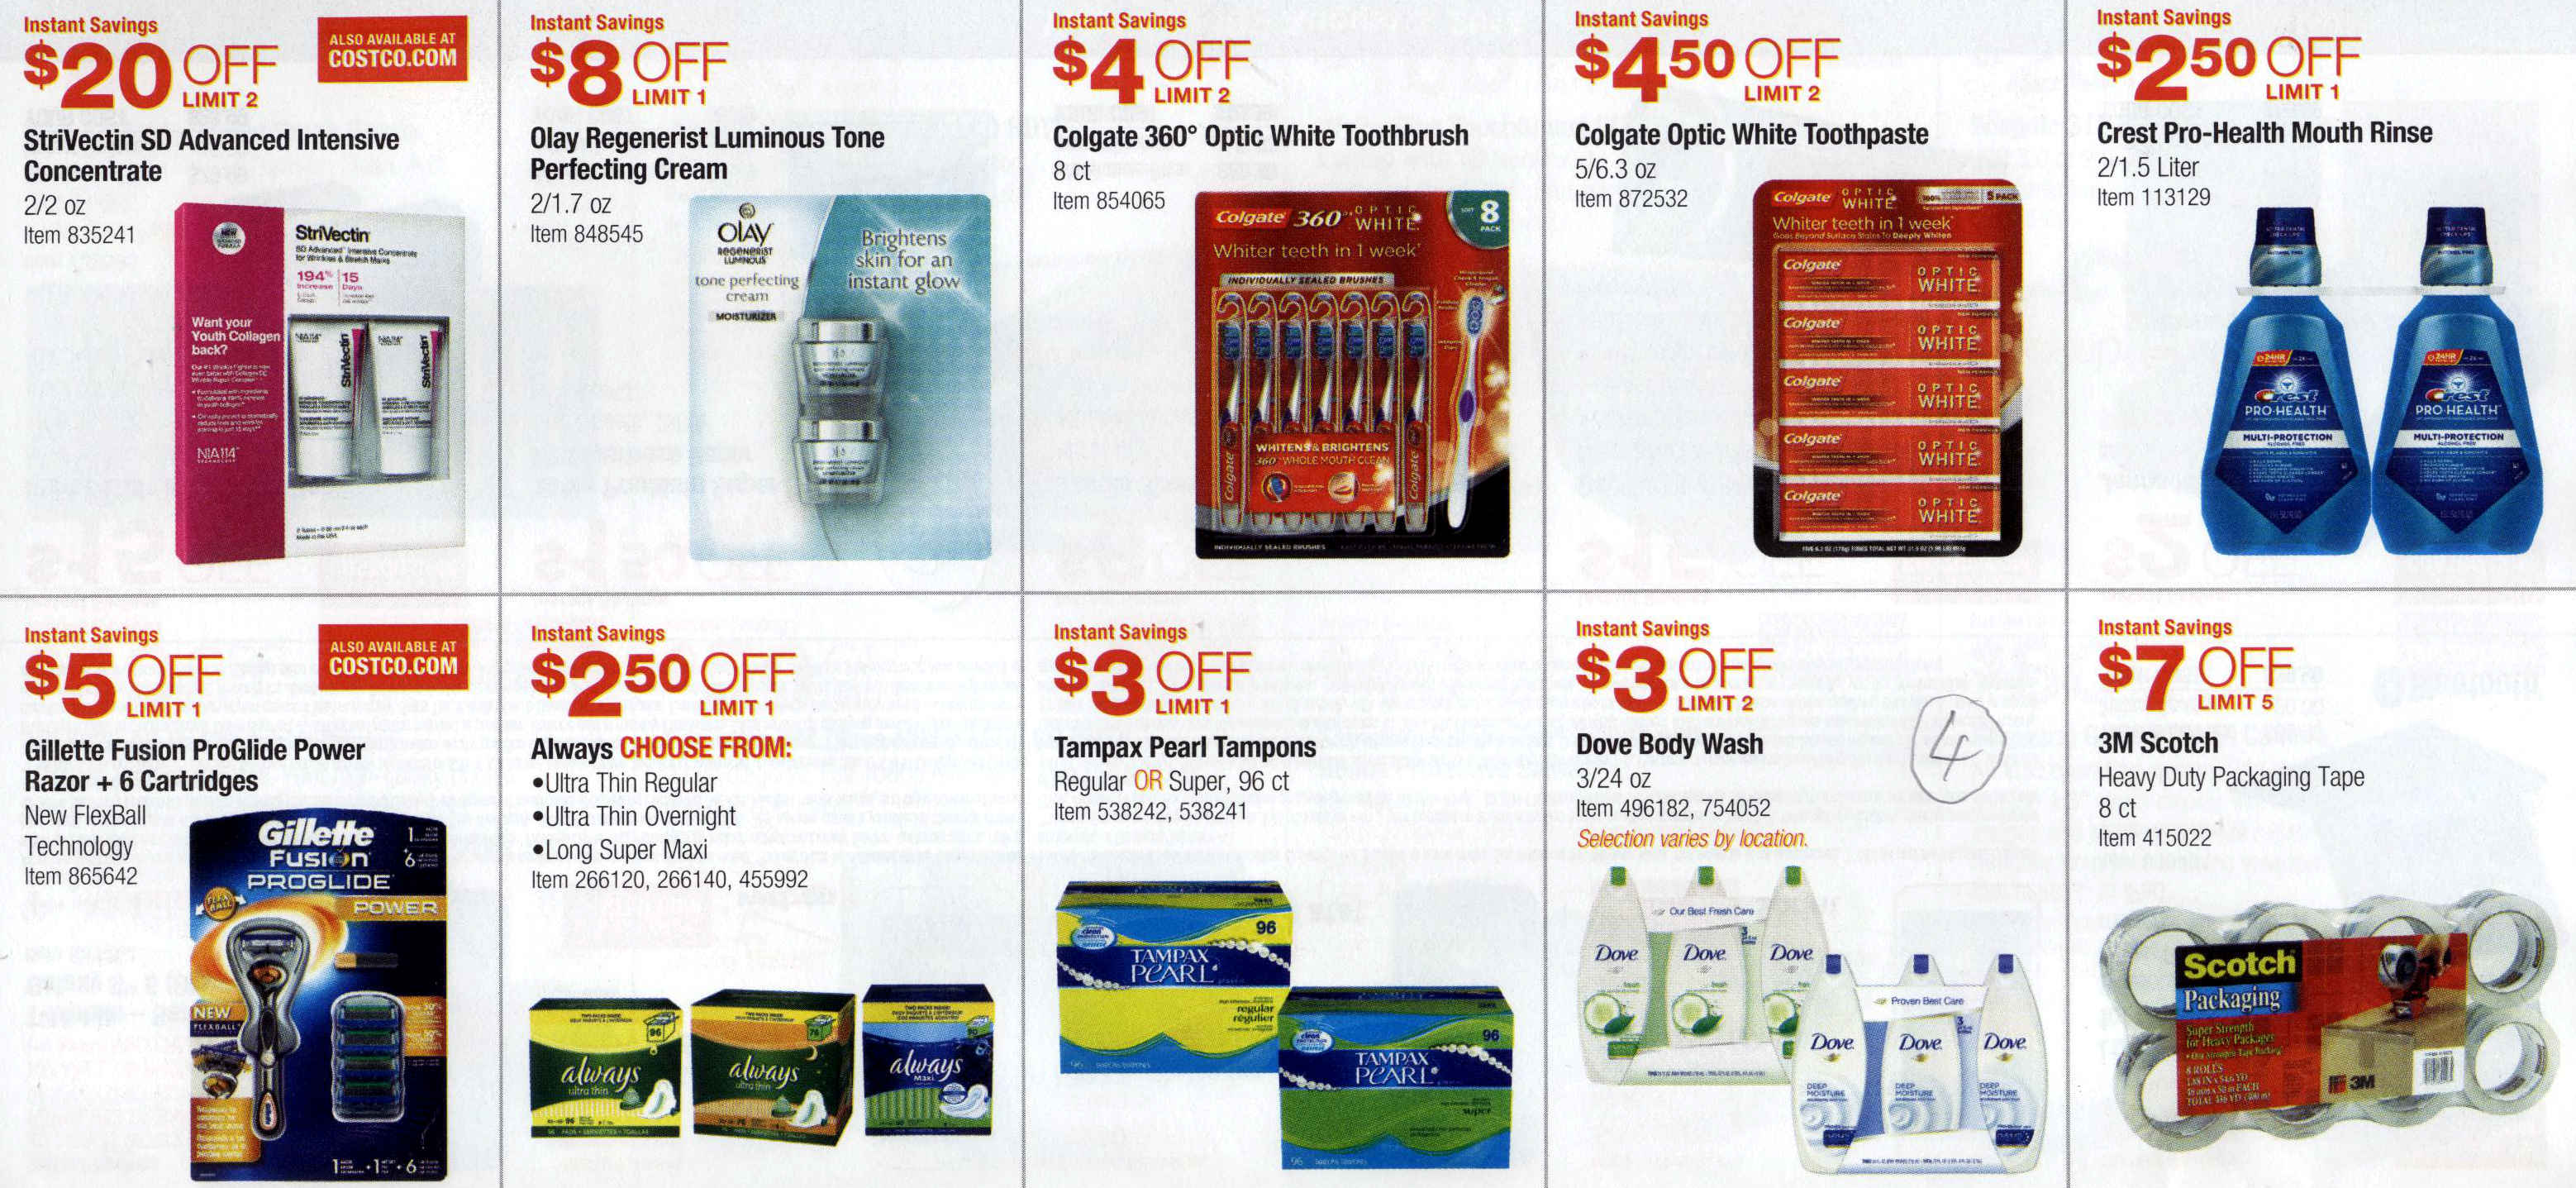 Coupon book full size page -> 4 <-